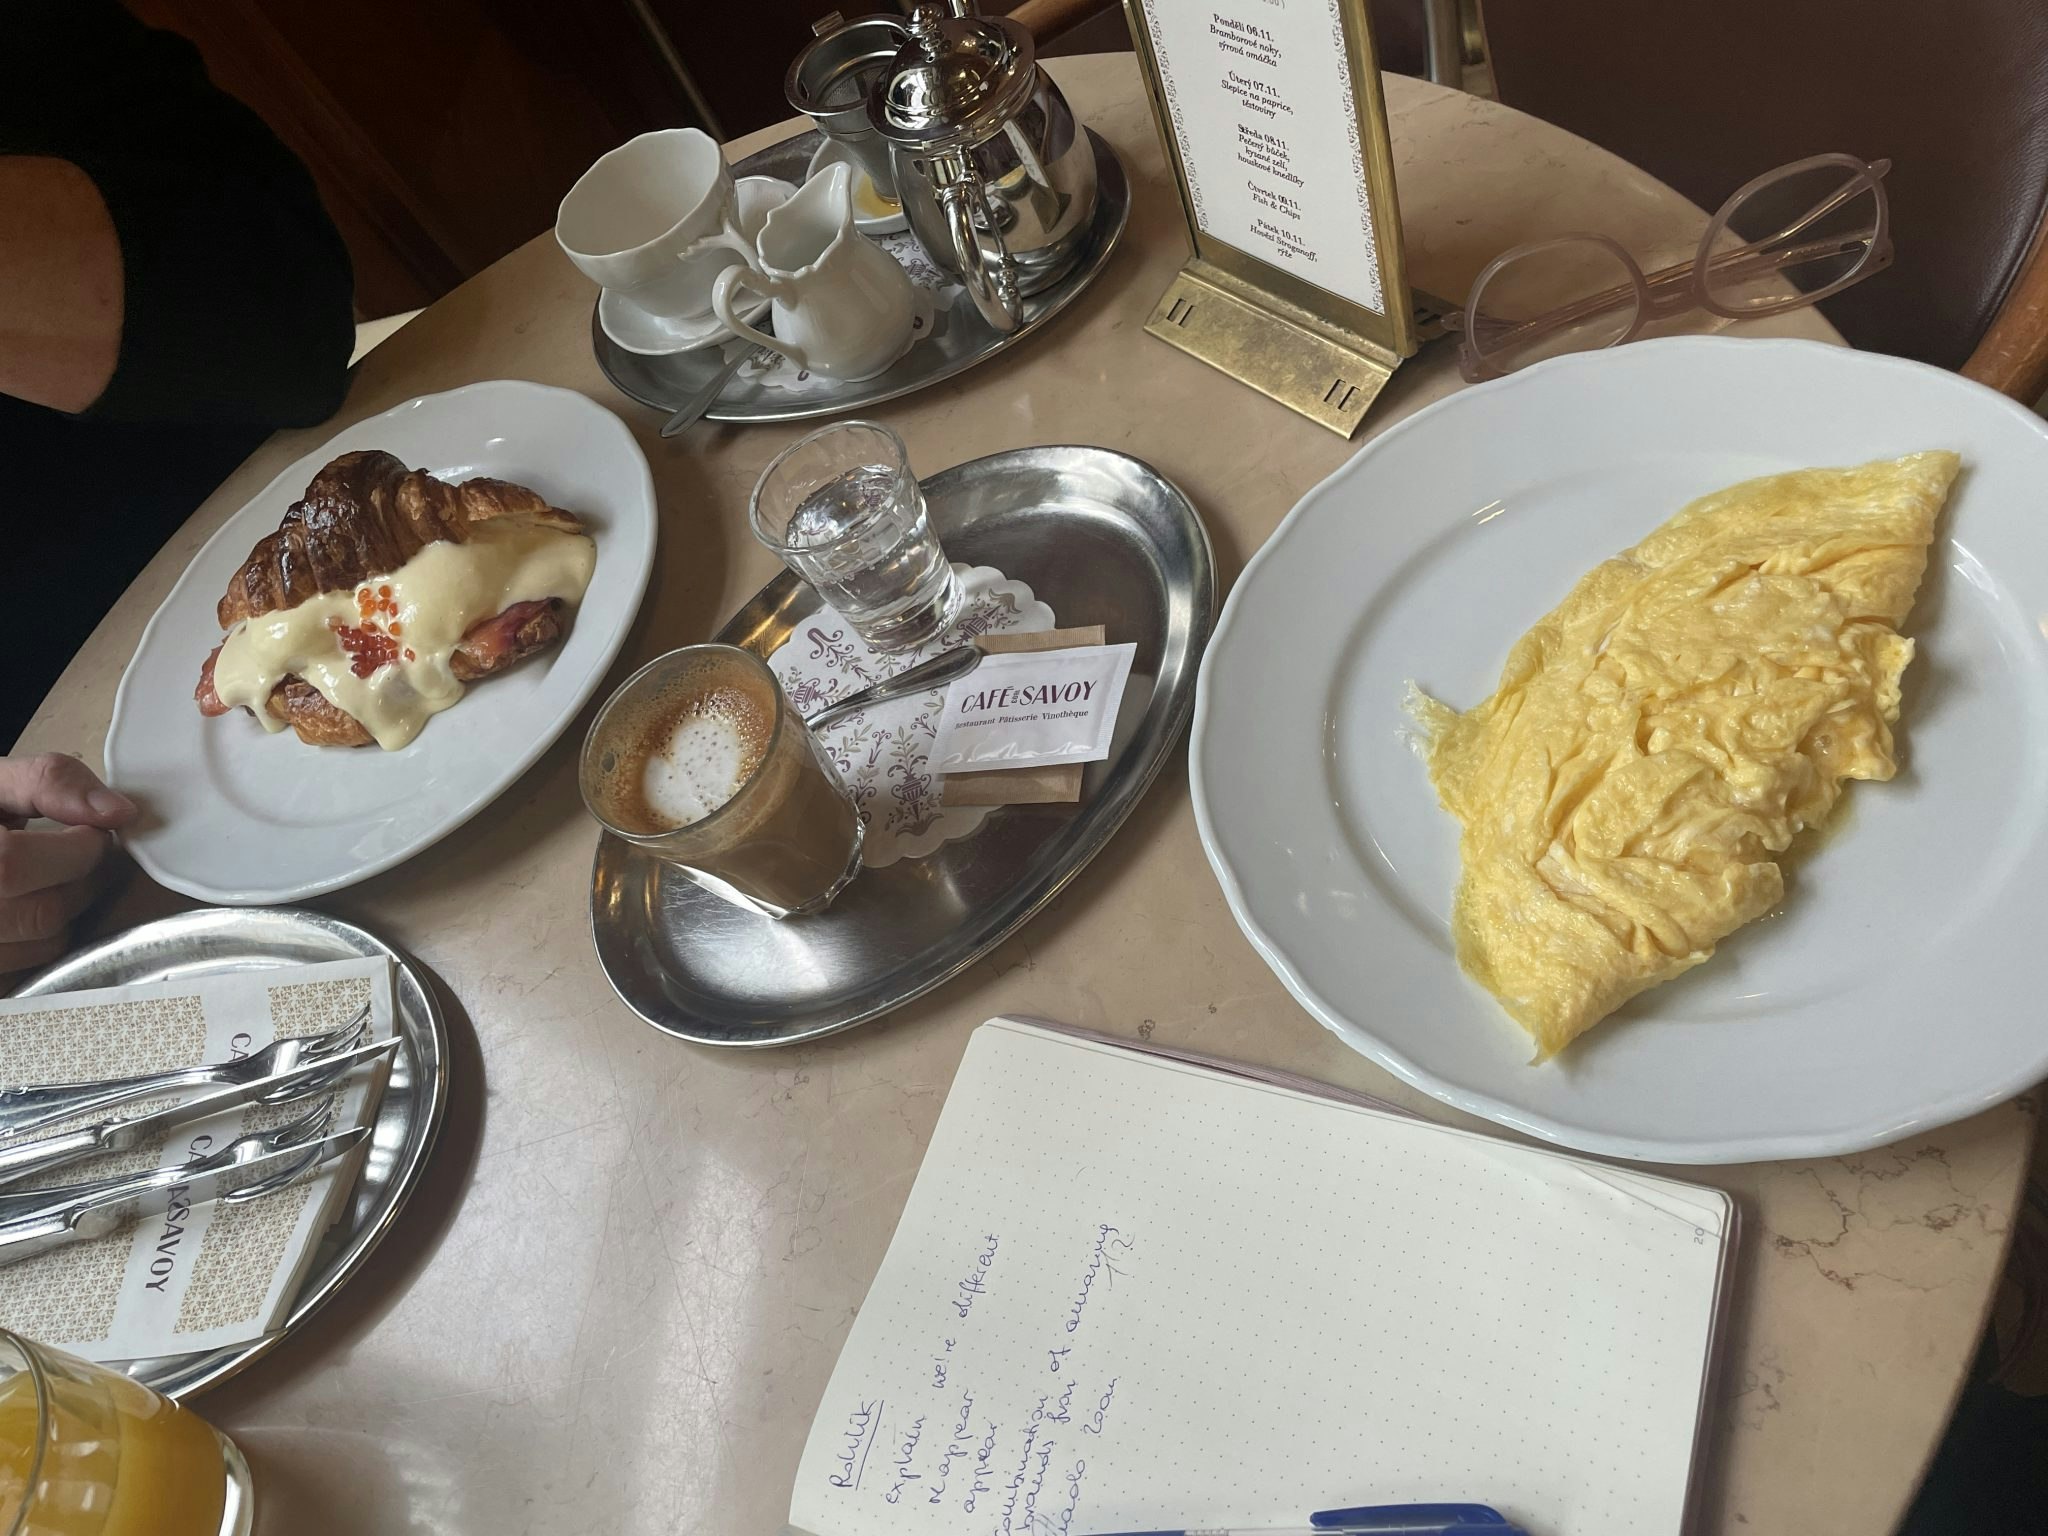 A picture of a table at the Cafe Savoy, showing an omelette, a croissant and tea and coffee.